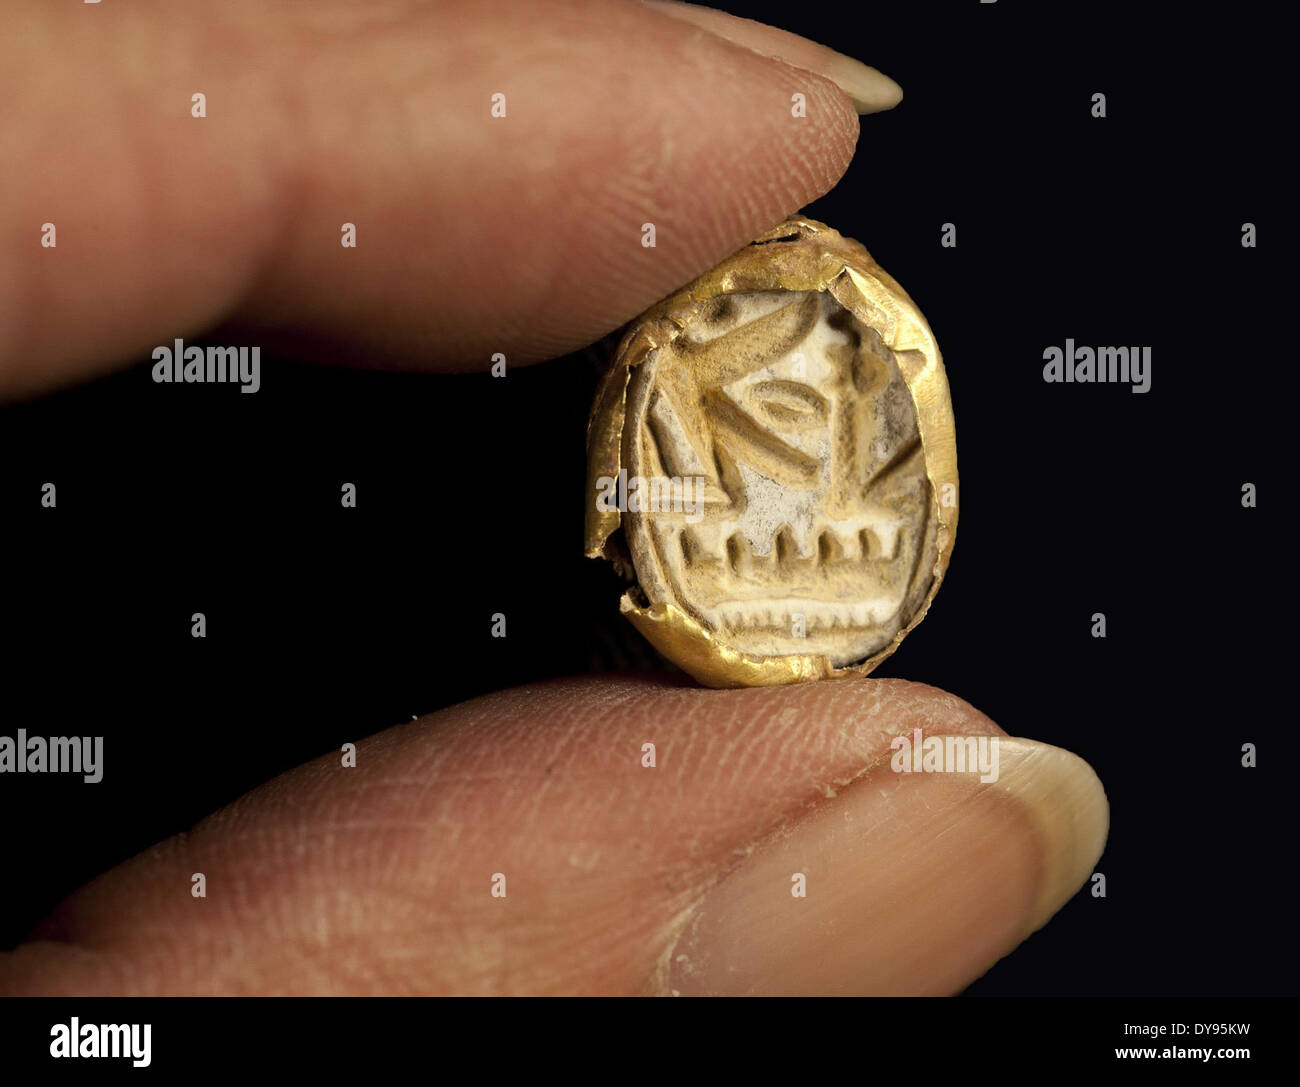 (140410) -- JERUSALEM, April 10, 2014 (Xinhua) -- File photo taken on April 3, 2014, and released by Israel's Antiquities Authority shows a scarab seal ring encased in gold, bearing the name of Pharaoh Seti I who ruled ancient Egypt in the 13th century BC, found at Tel Shadud, an archaeological mound in the Jezreel Valley, northern Israel. A 3,200-year-old coffin containing Egyptian valuables that archaeologists believe belonged to a high-ranking Canaanite official has been discovered in northern Israel, Israel's Antiquities Authority announced on April 9, 2014. The clay sarcophagus was found Stock Photo